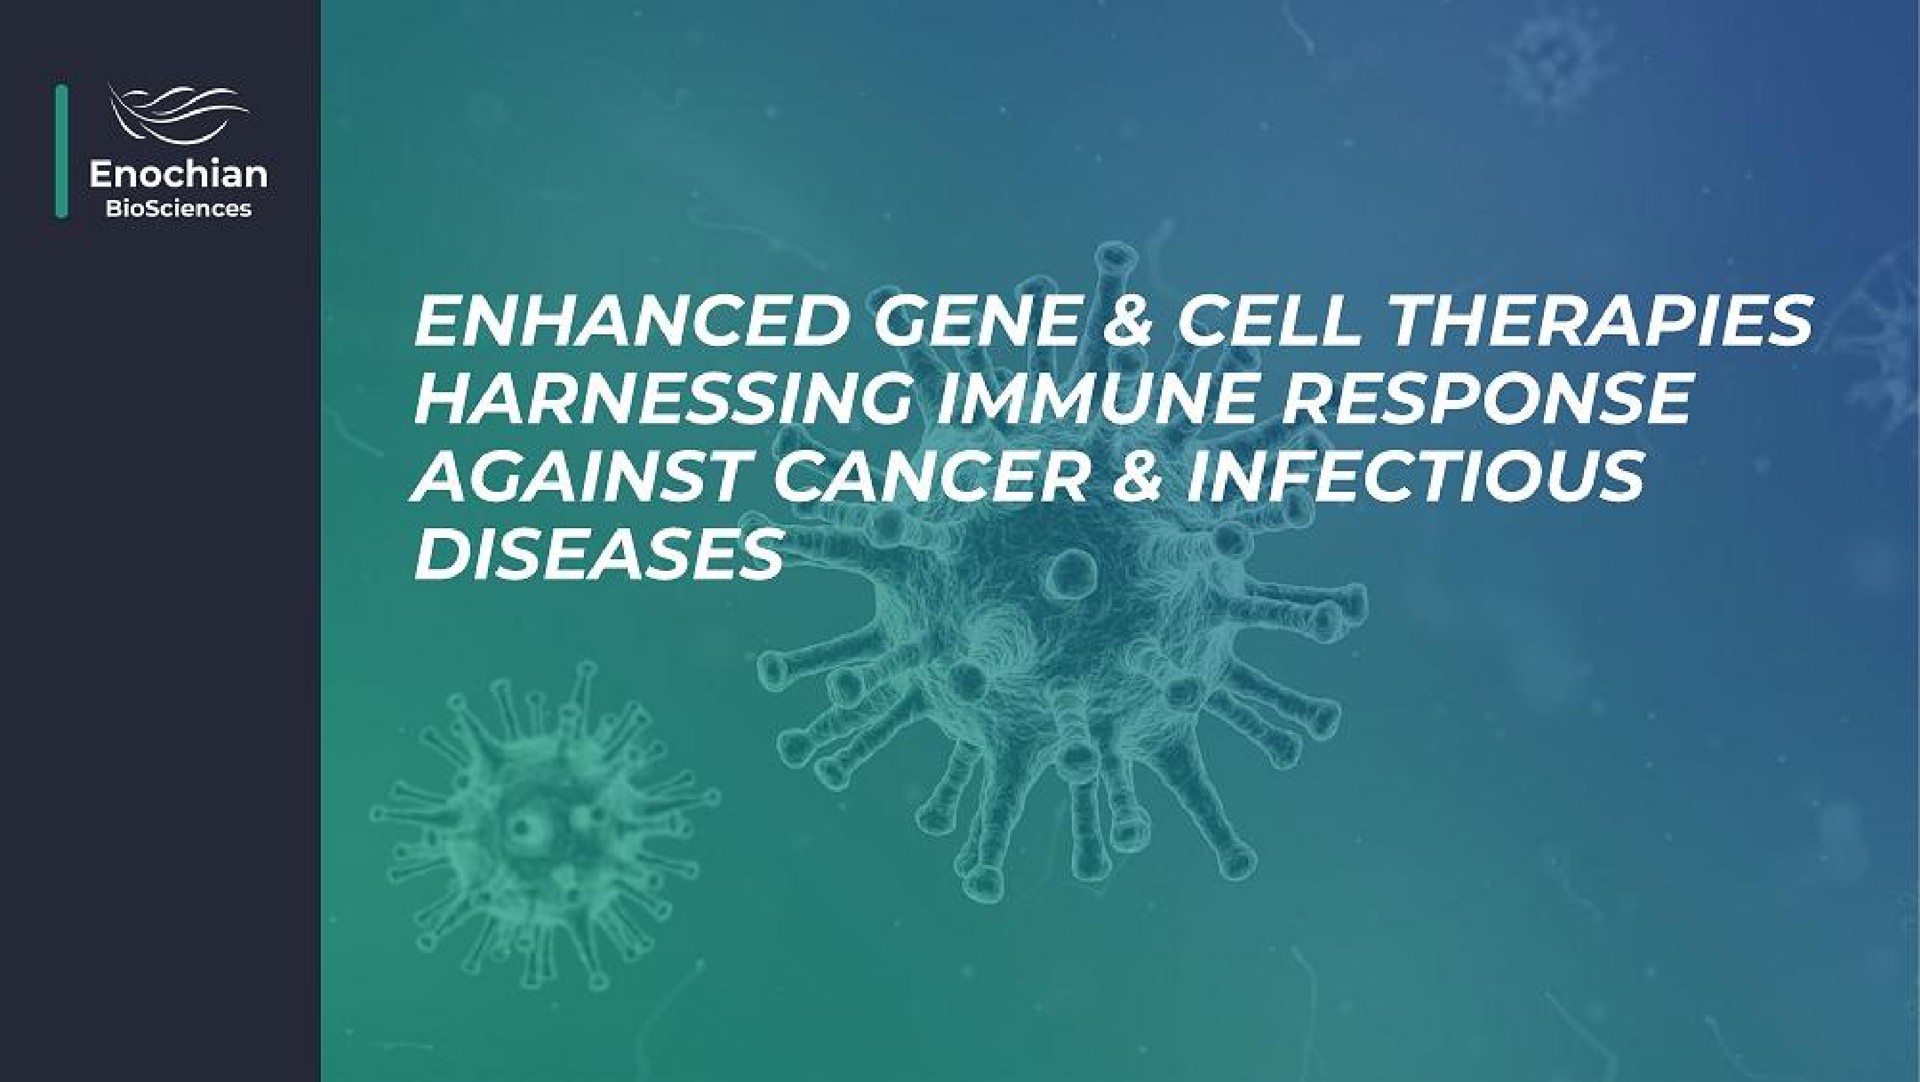 roe enhanced gene cell therapies harnessing immune response against cancer infectious diseases | Enochian Biosciences